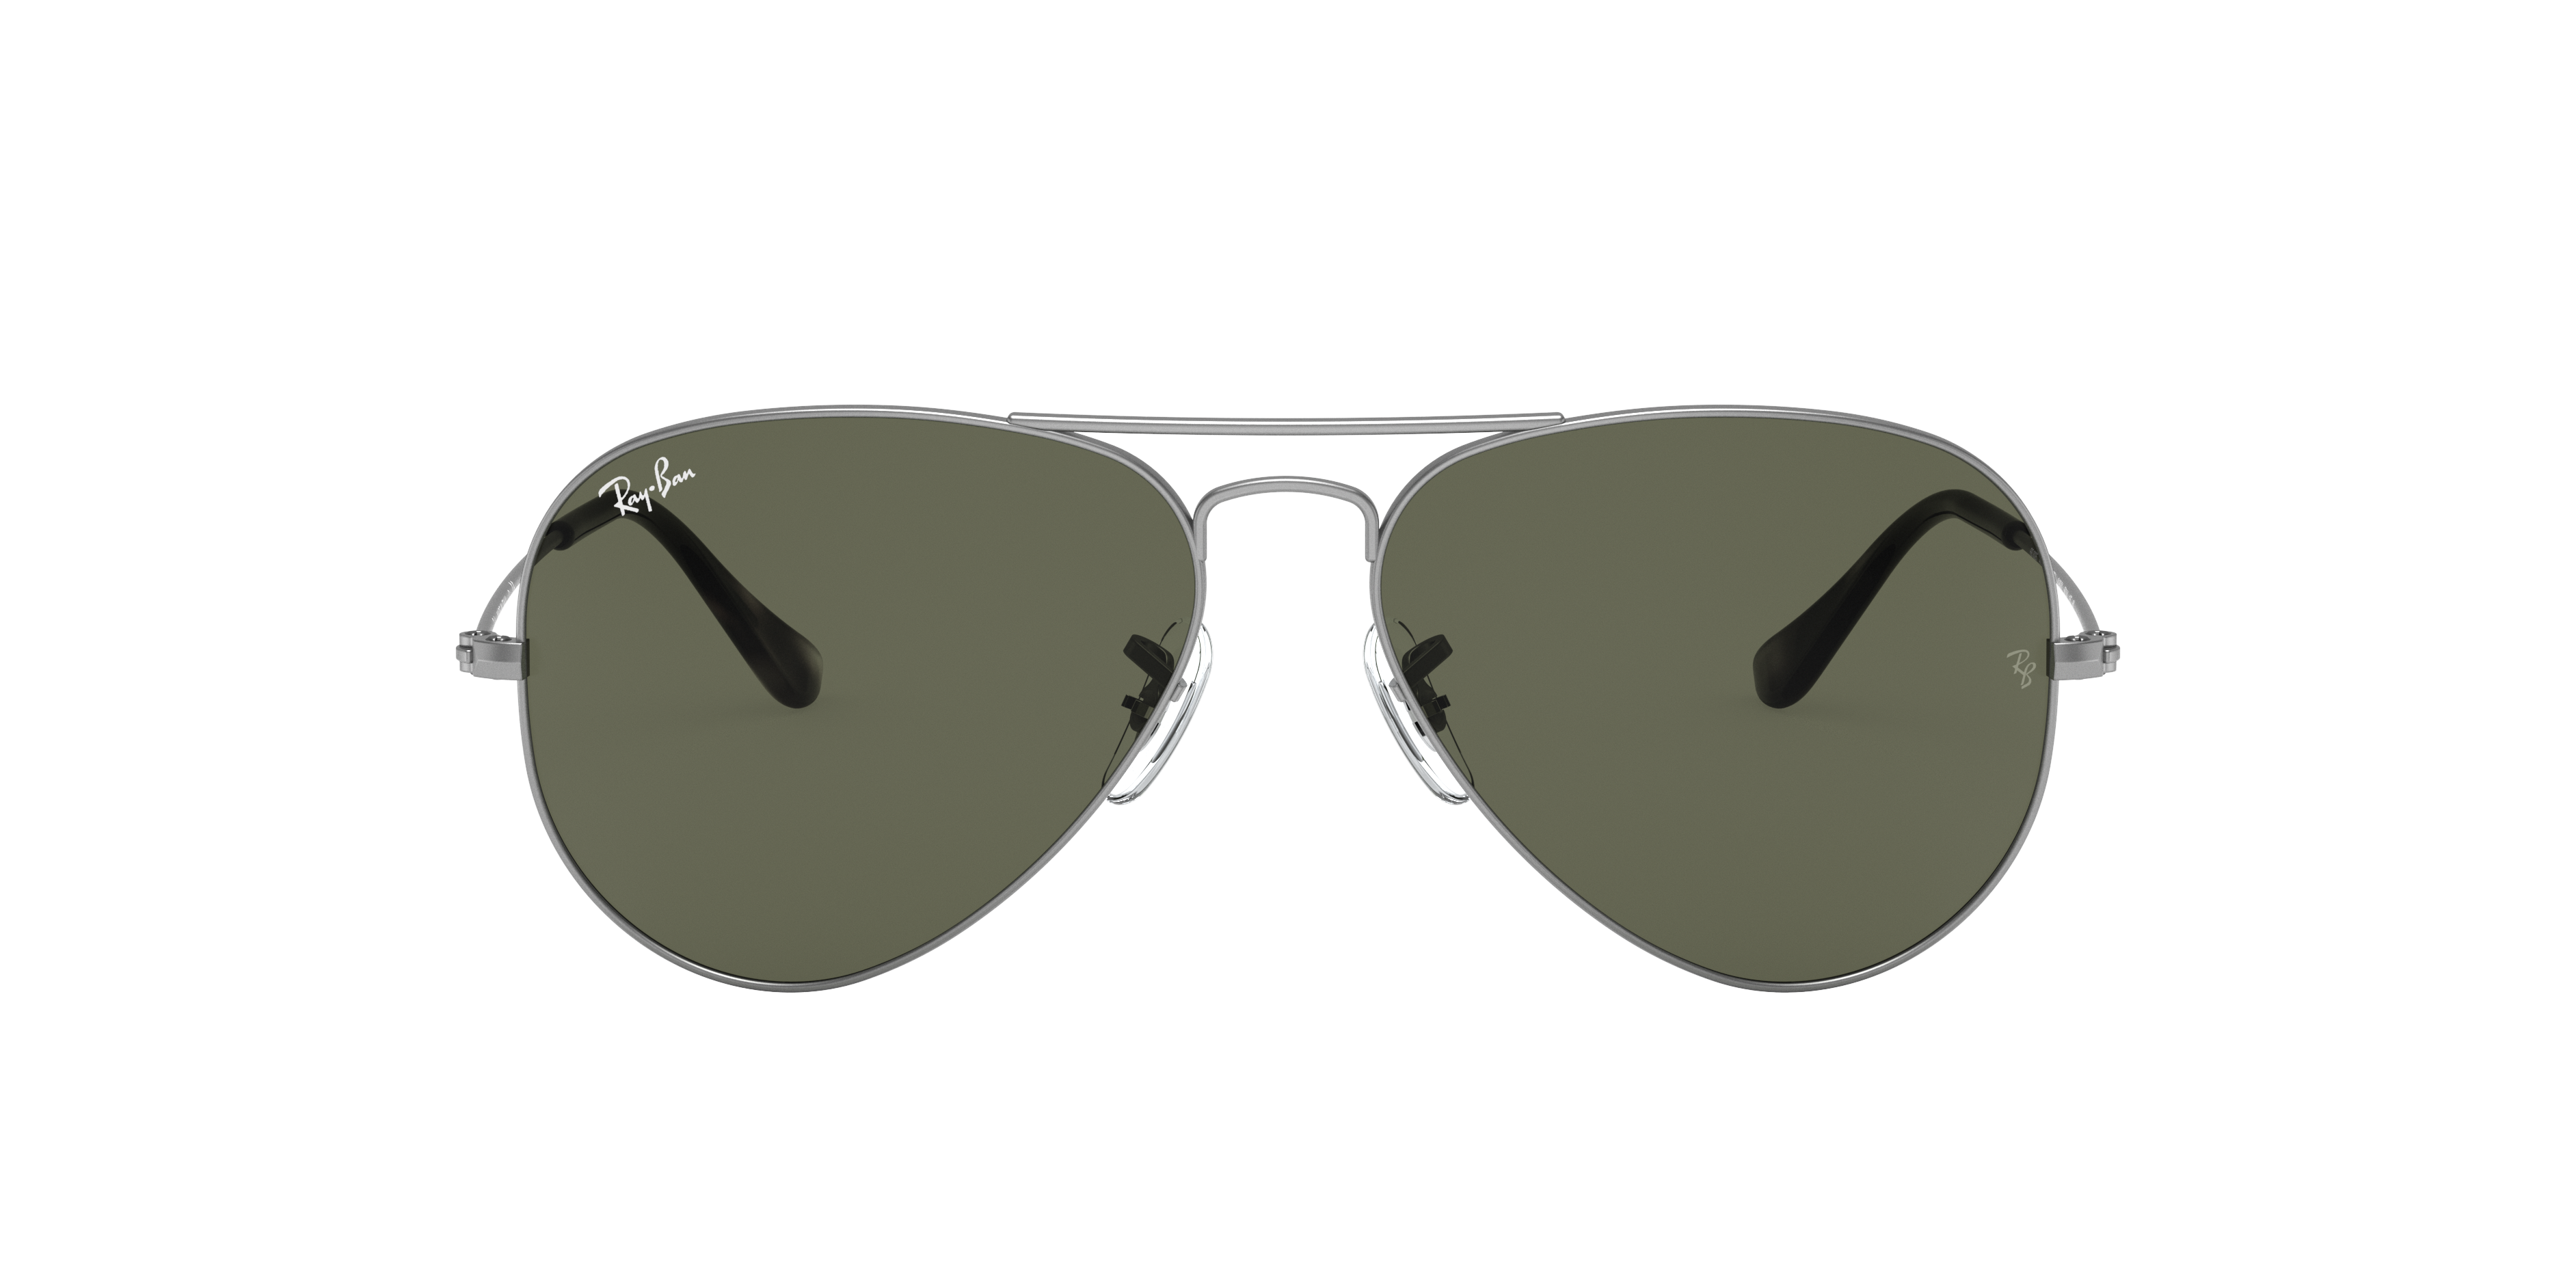 Are Aviator Sunglasses In Style In 2023? – SOJOS